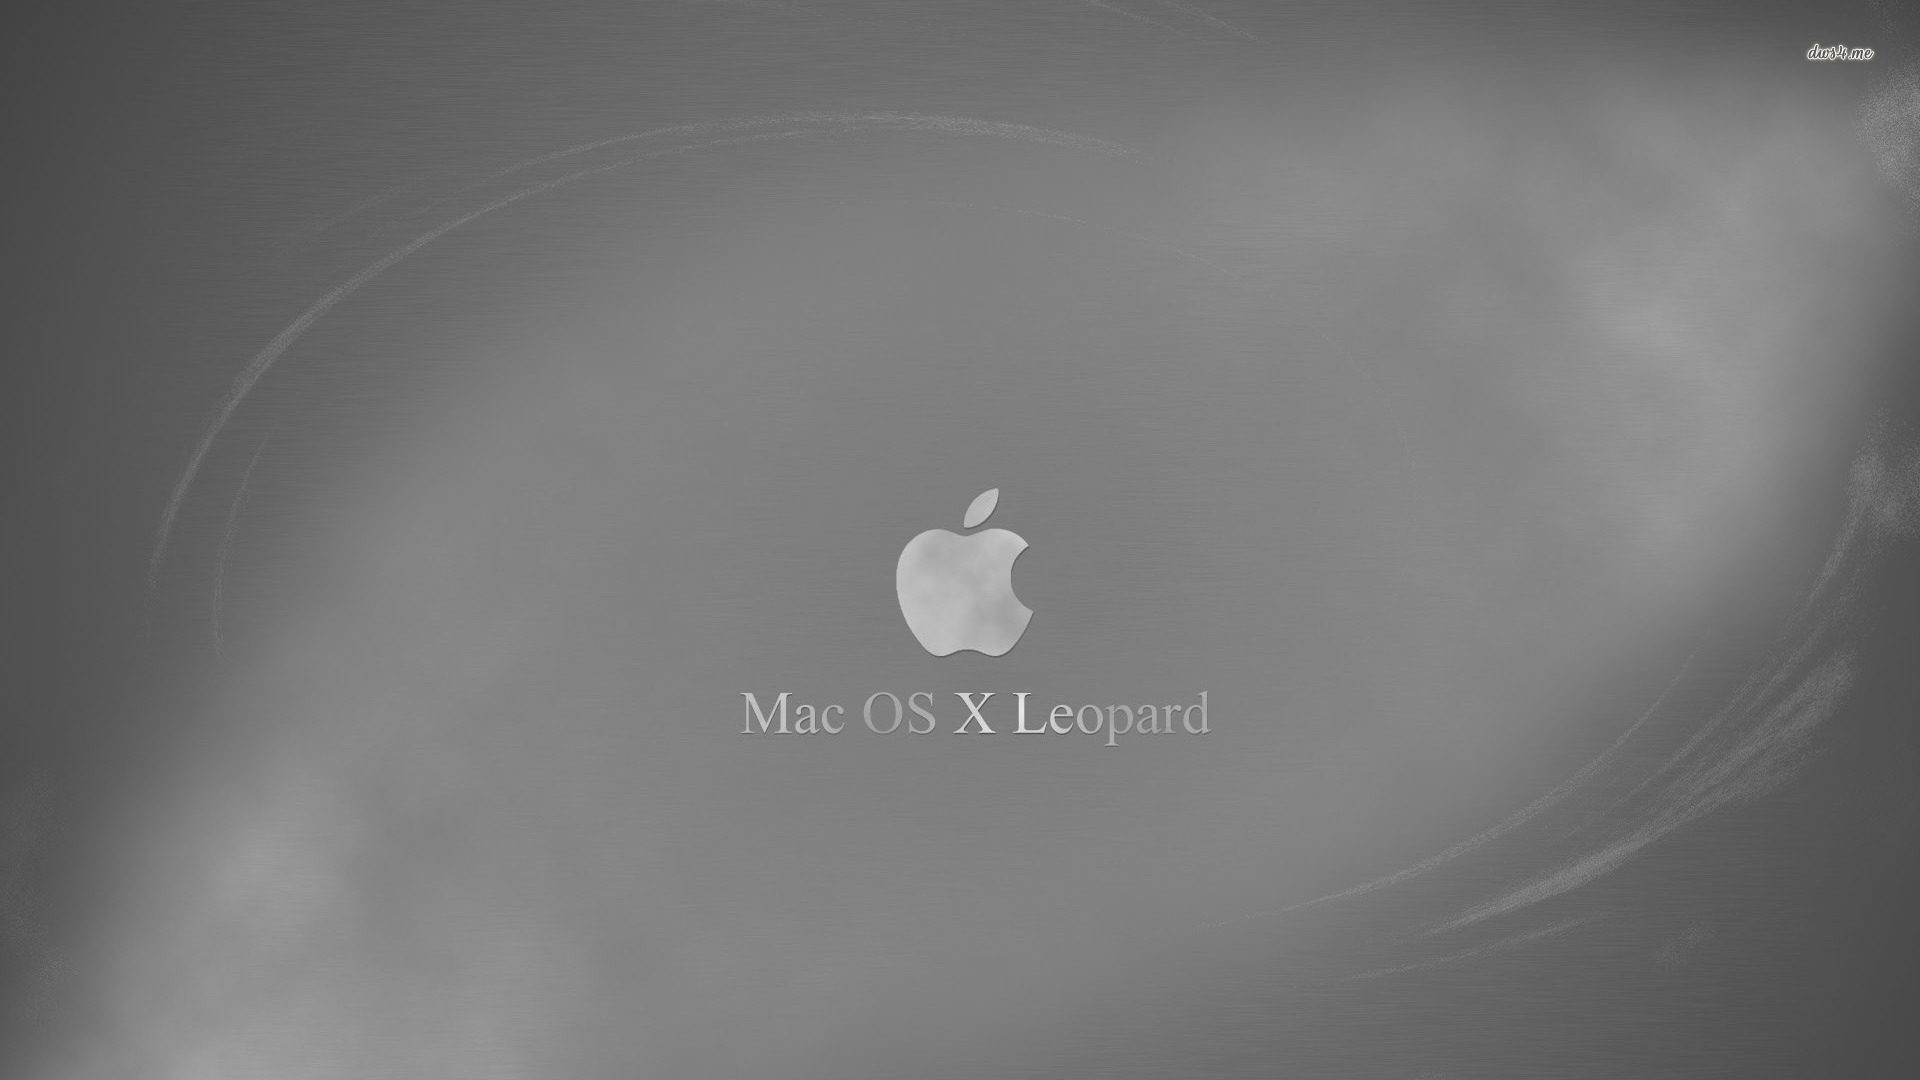 snow leopard os x download for macbook air